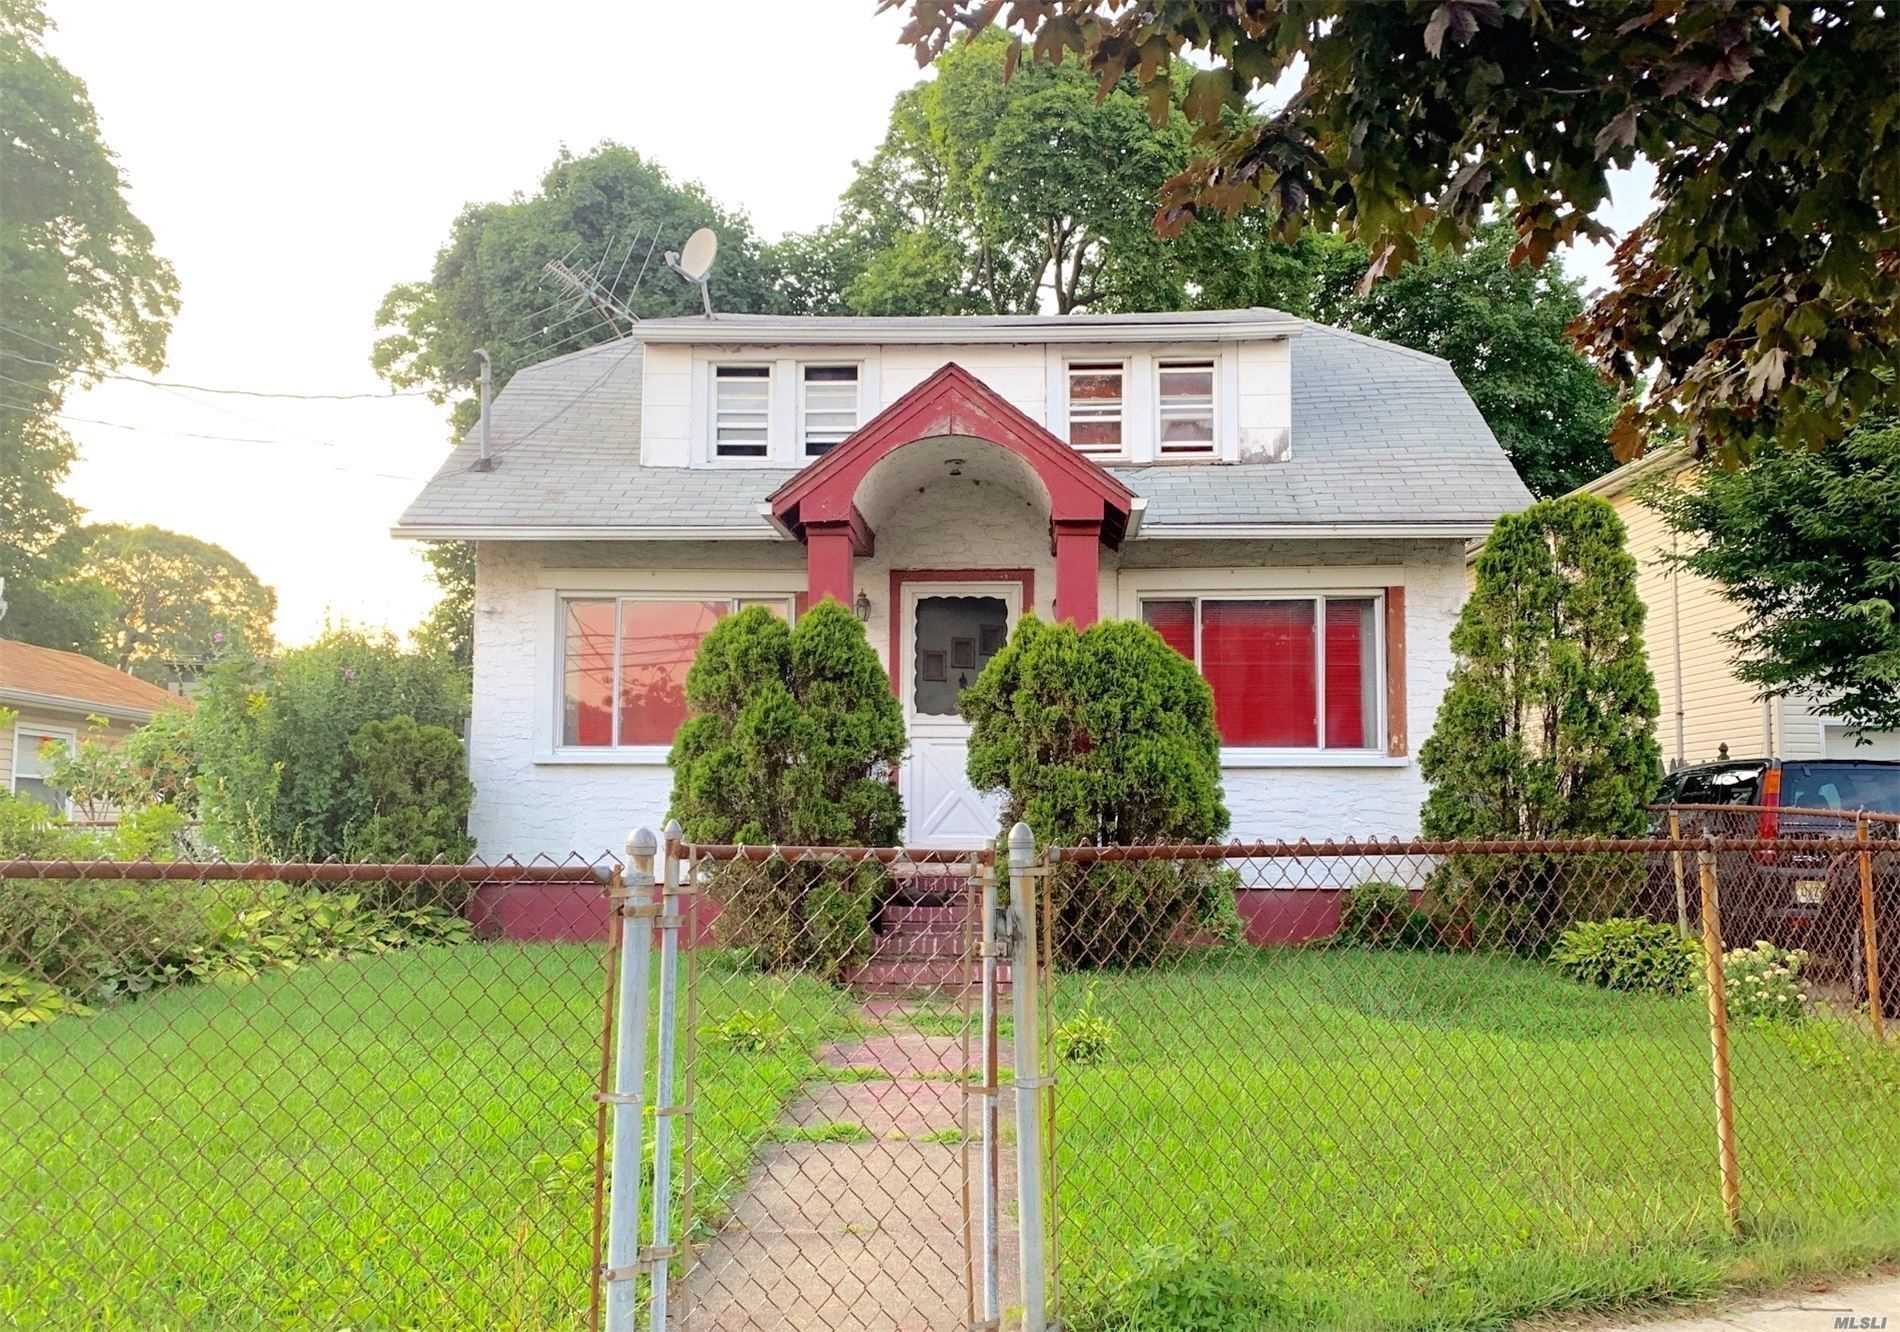 Opportunity Is Knocking!!! Freeport; This 1 Family Detached Cape Features A Full Basement, 3 Bedrooms, 1.5 Baths, Private Driveway & More. It&rsquo;s Conveniently Located Near Shopping Areas, Restaurants, And Places Of Worship Etc. It Won&rsquo;t Last!